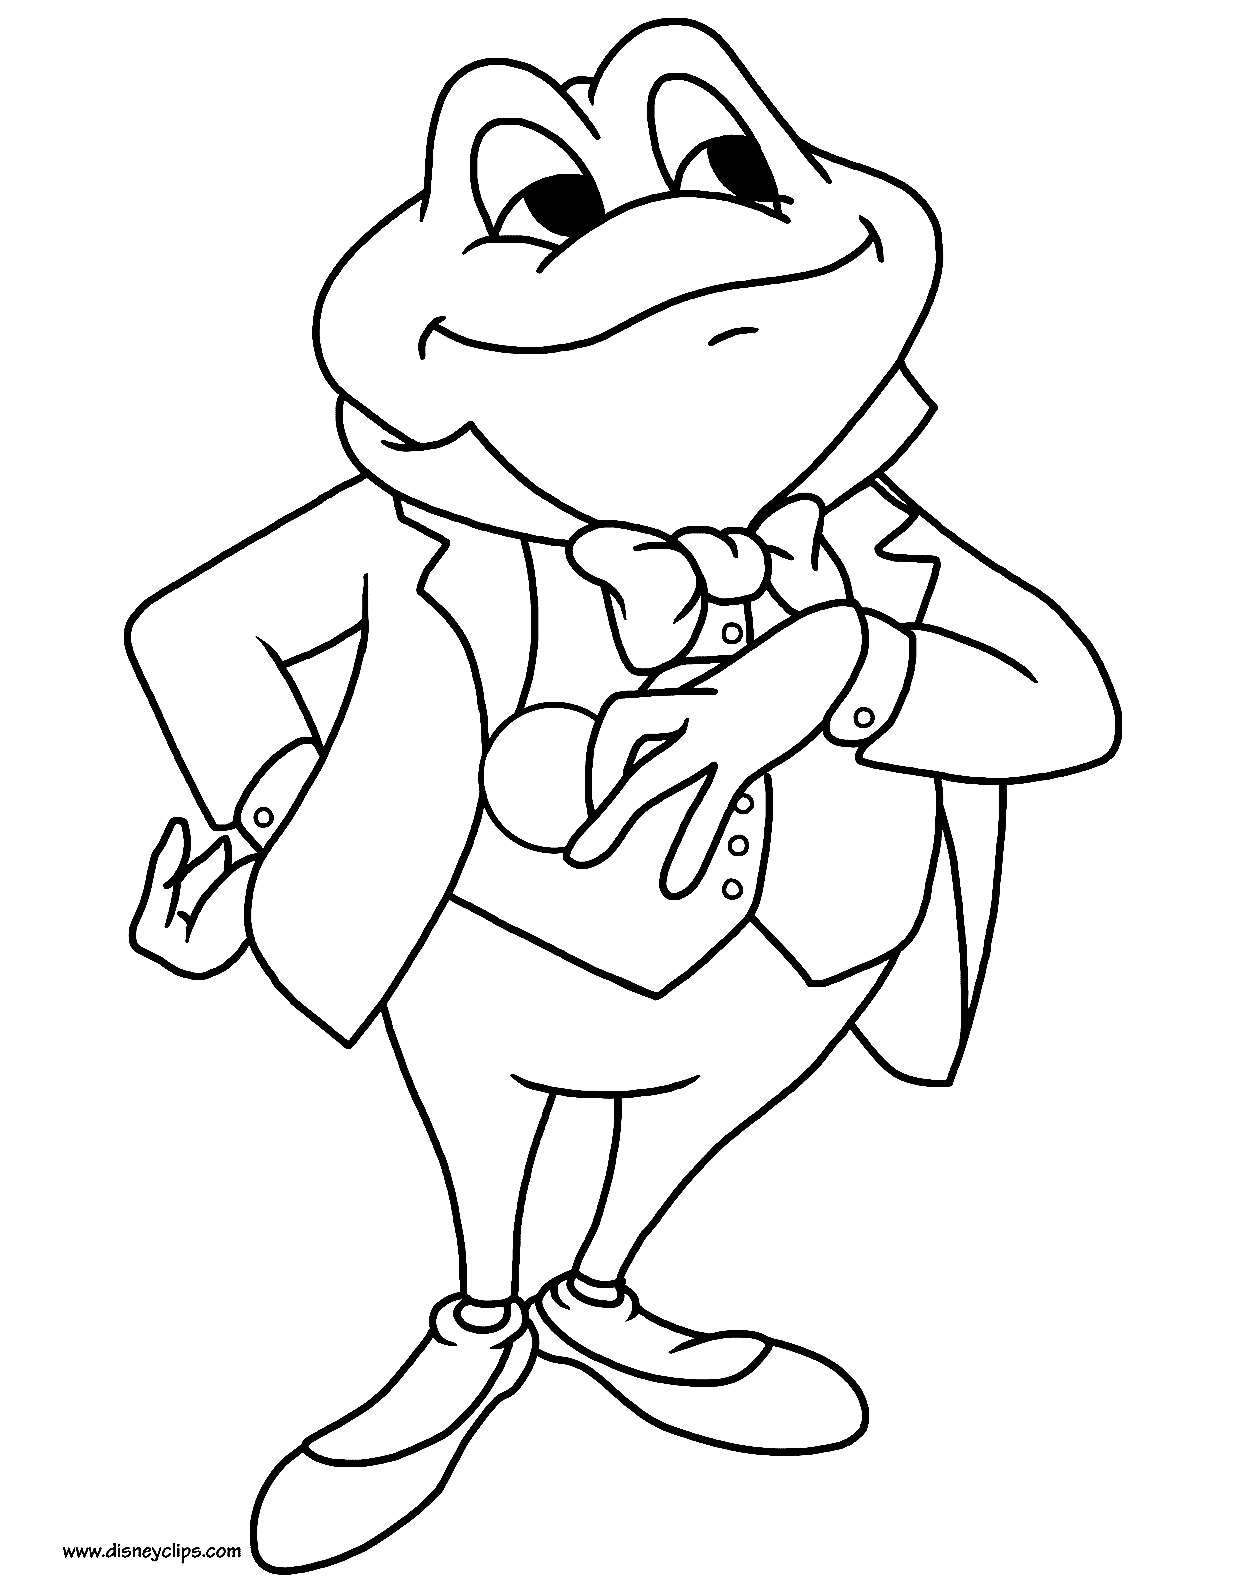 Mr. Toad elegant Coloring Pages